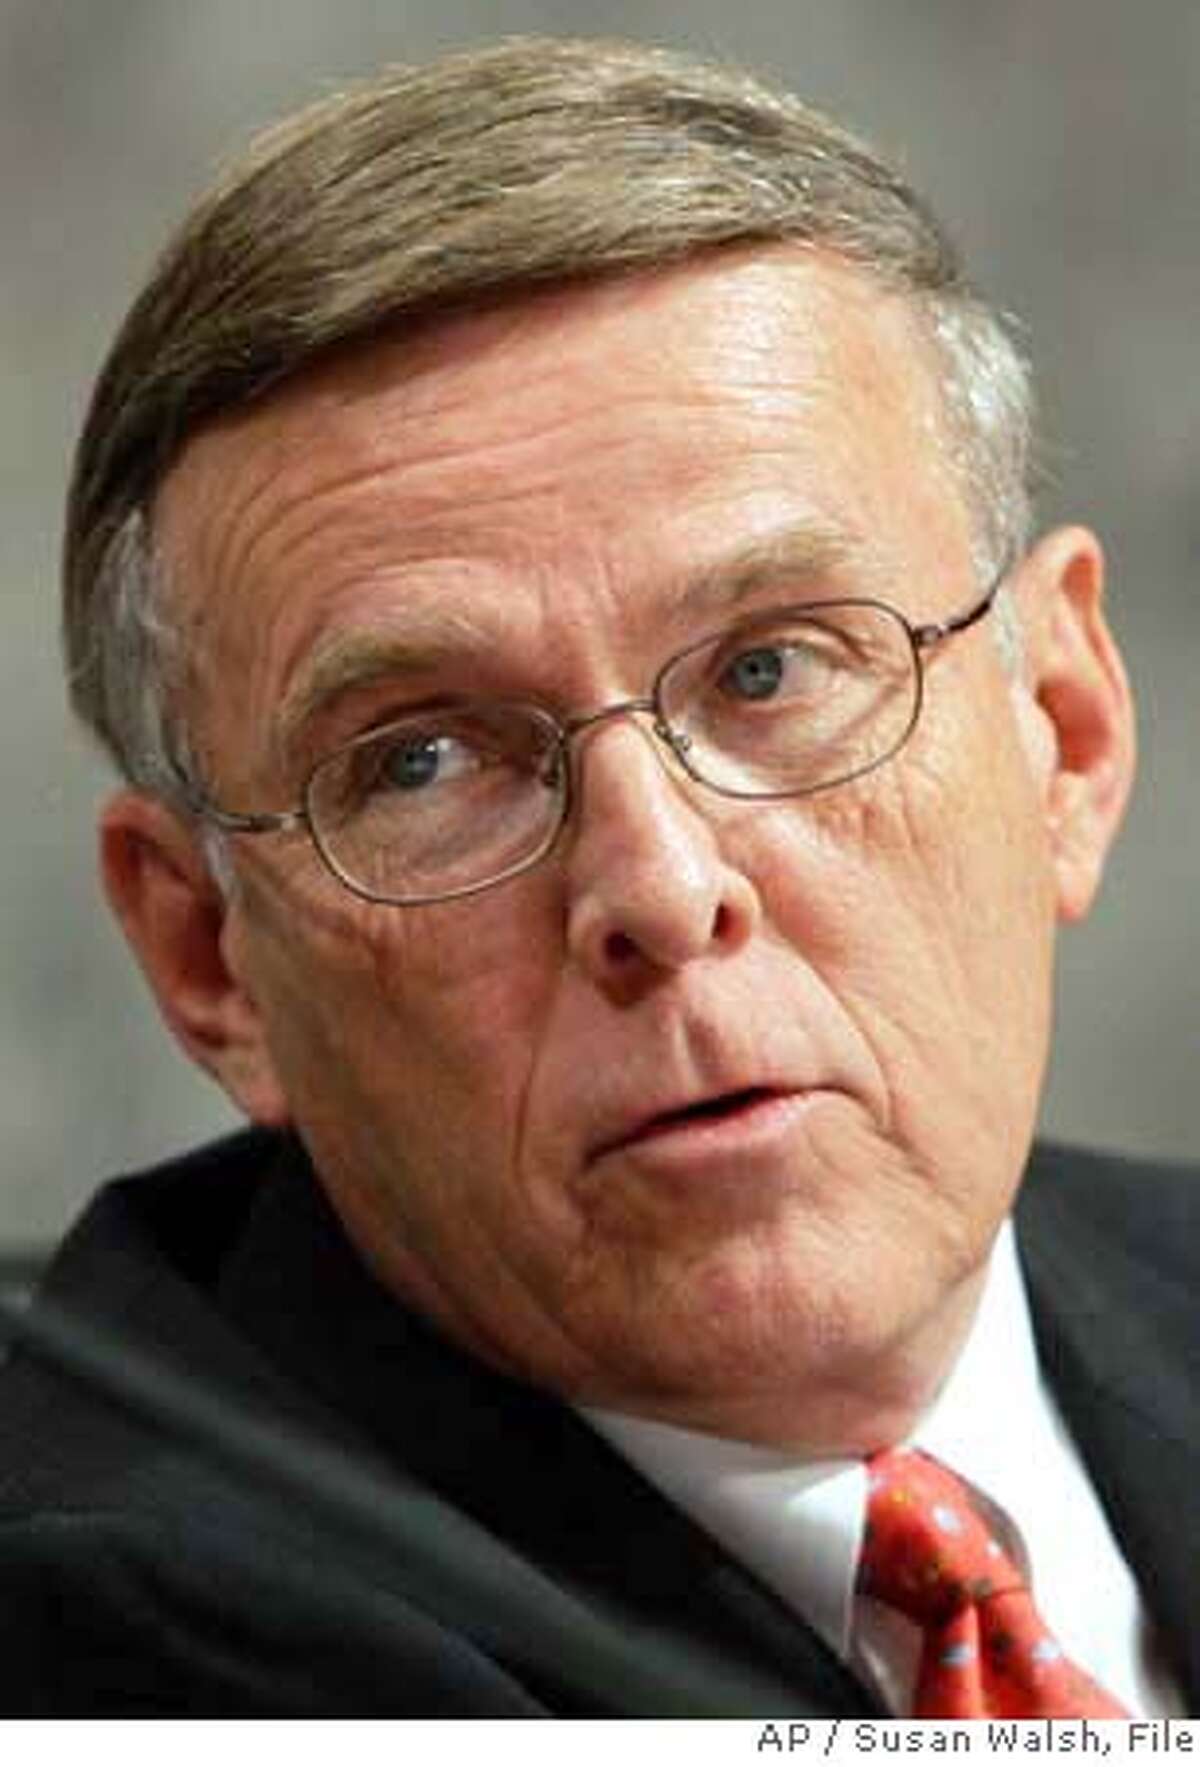 ** FILE ** Sen. Byron Dorgan, D-N.D., who appears duirng an Senate Indian Affairs Committee hearing on Capitol Hill in this June 22, 2005, file photo ... (AP Photo/Susan Walsh, File) A JUNE 22, 2005 FILE PHOTO